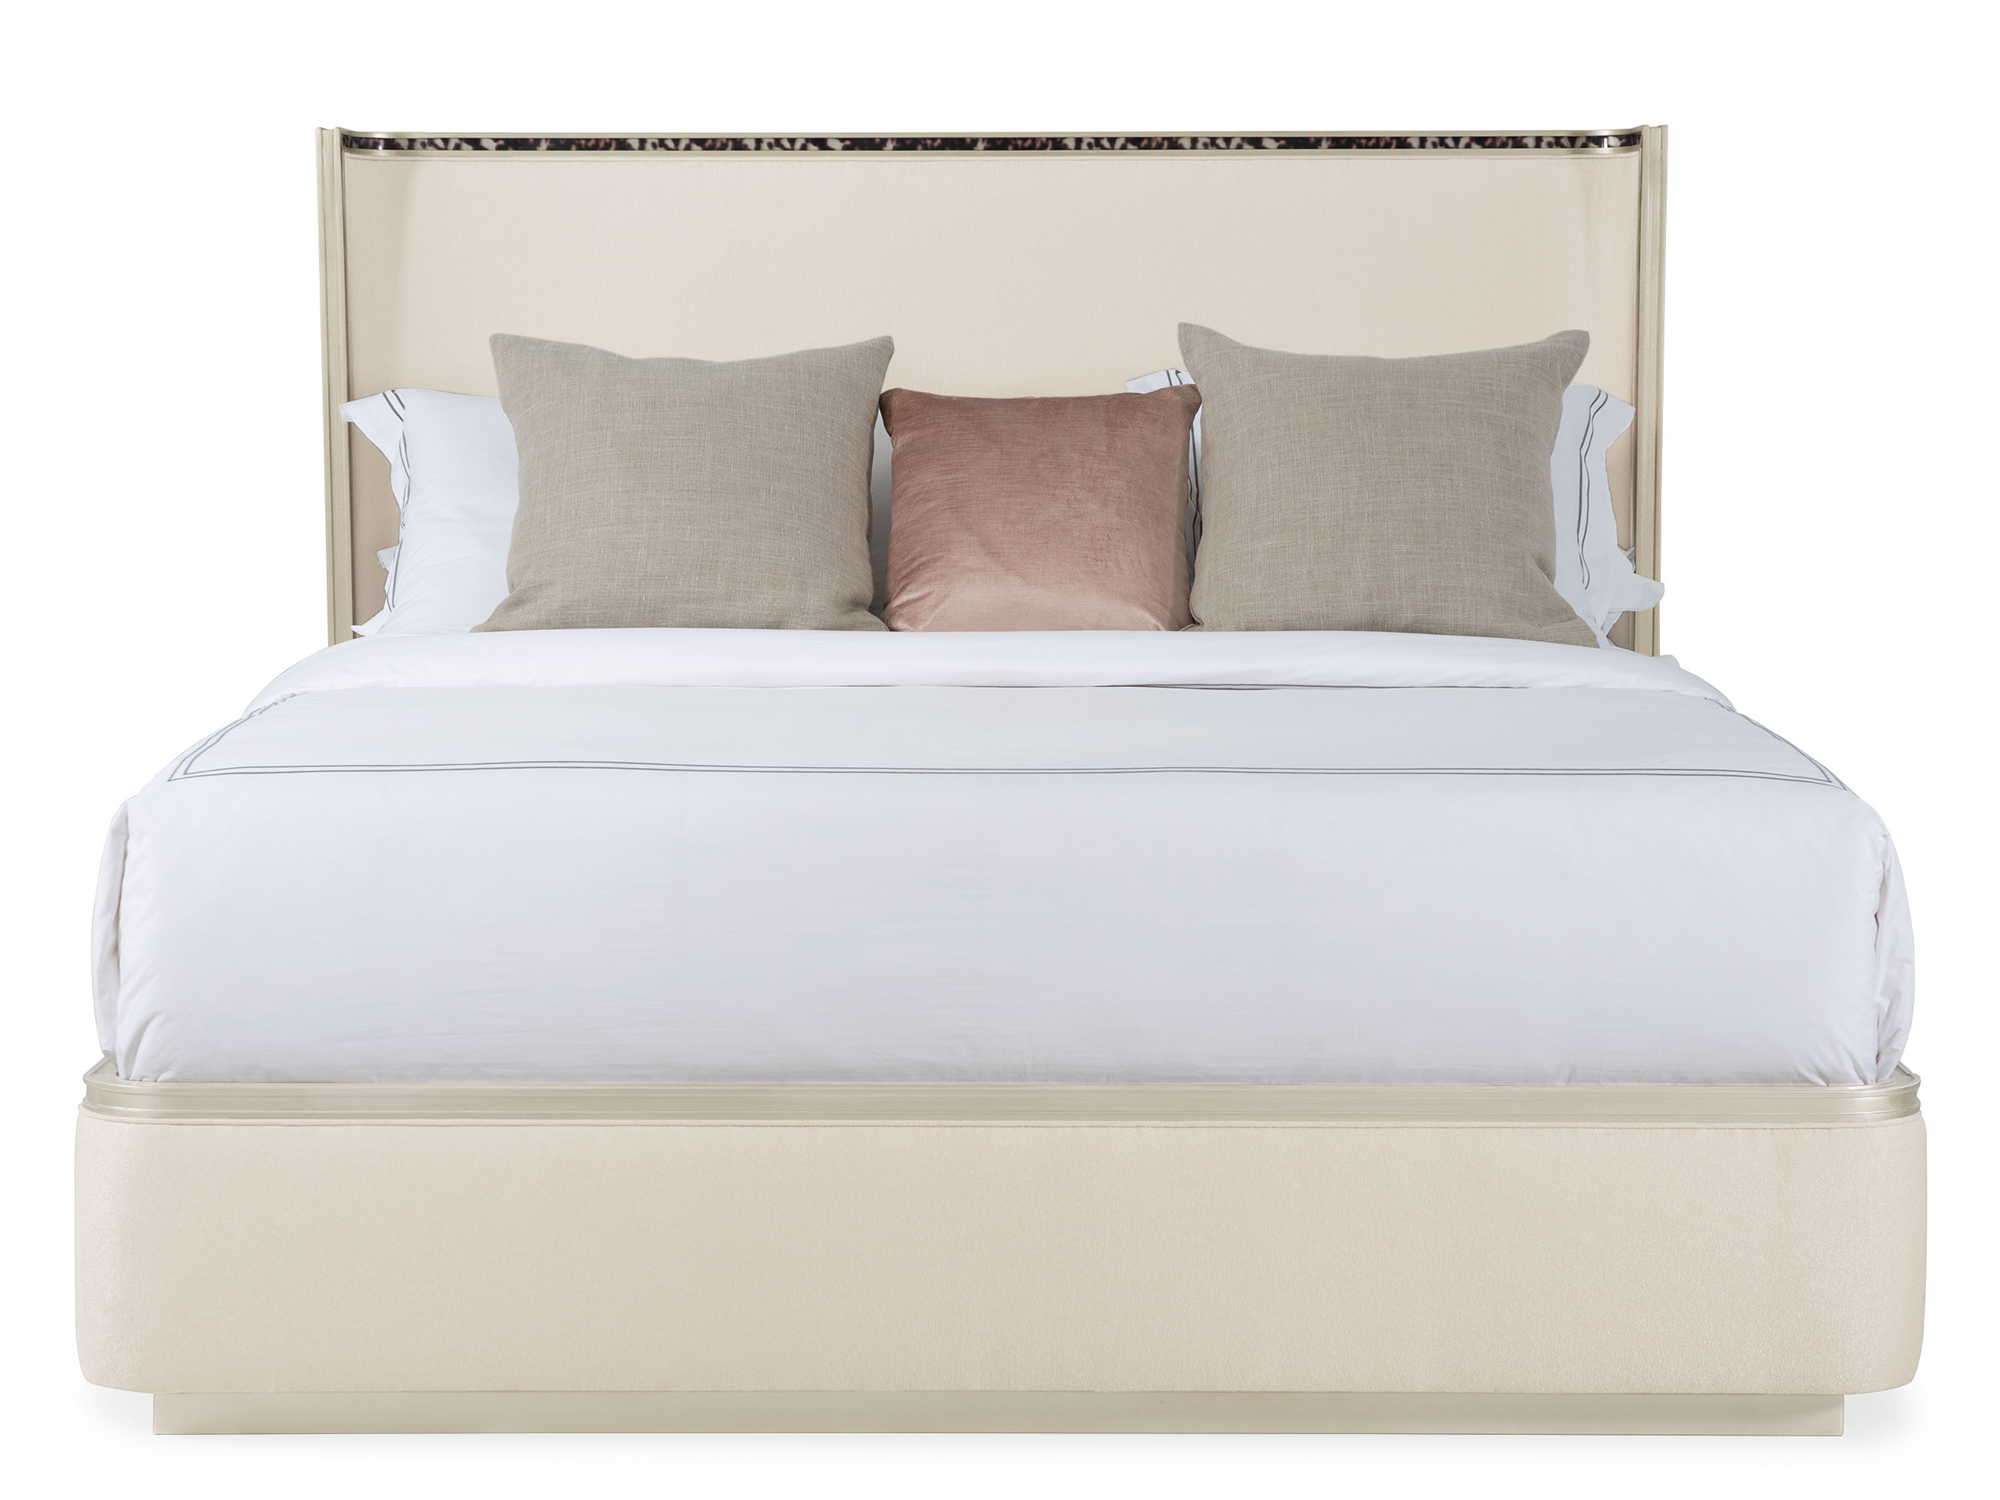 Babs Dream Big Bed - Euro Living Furniture